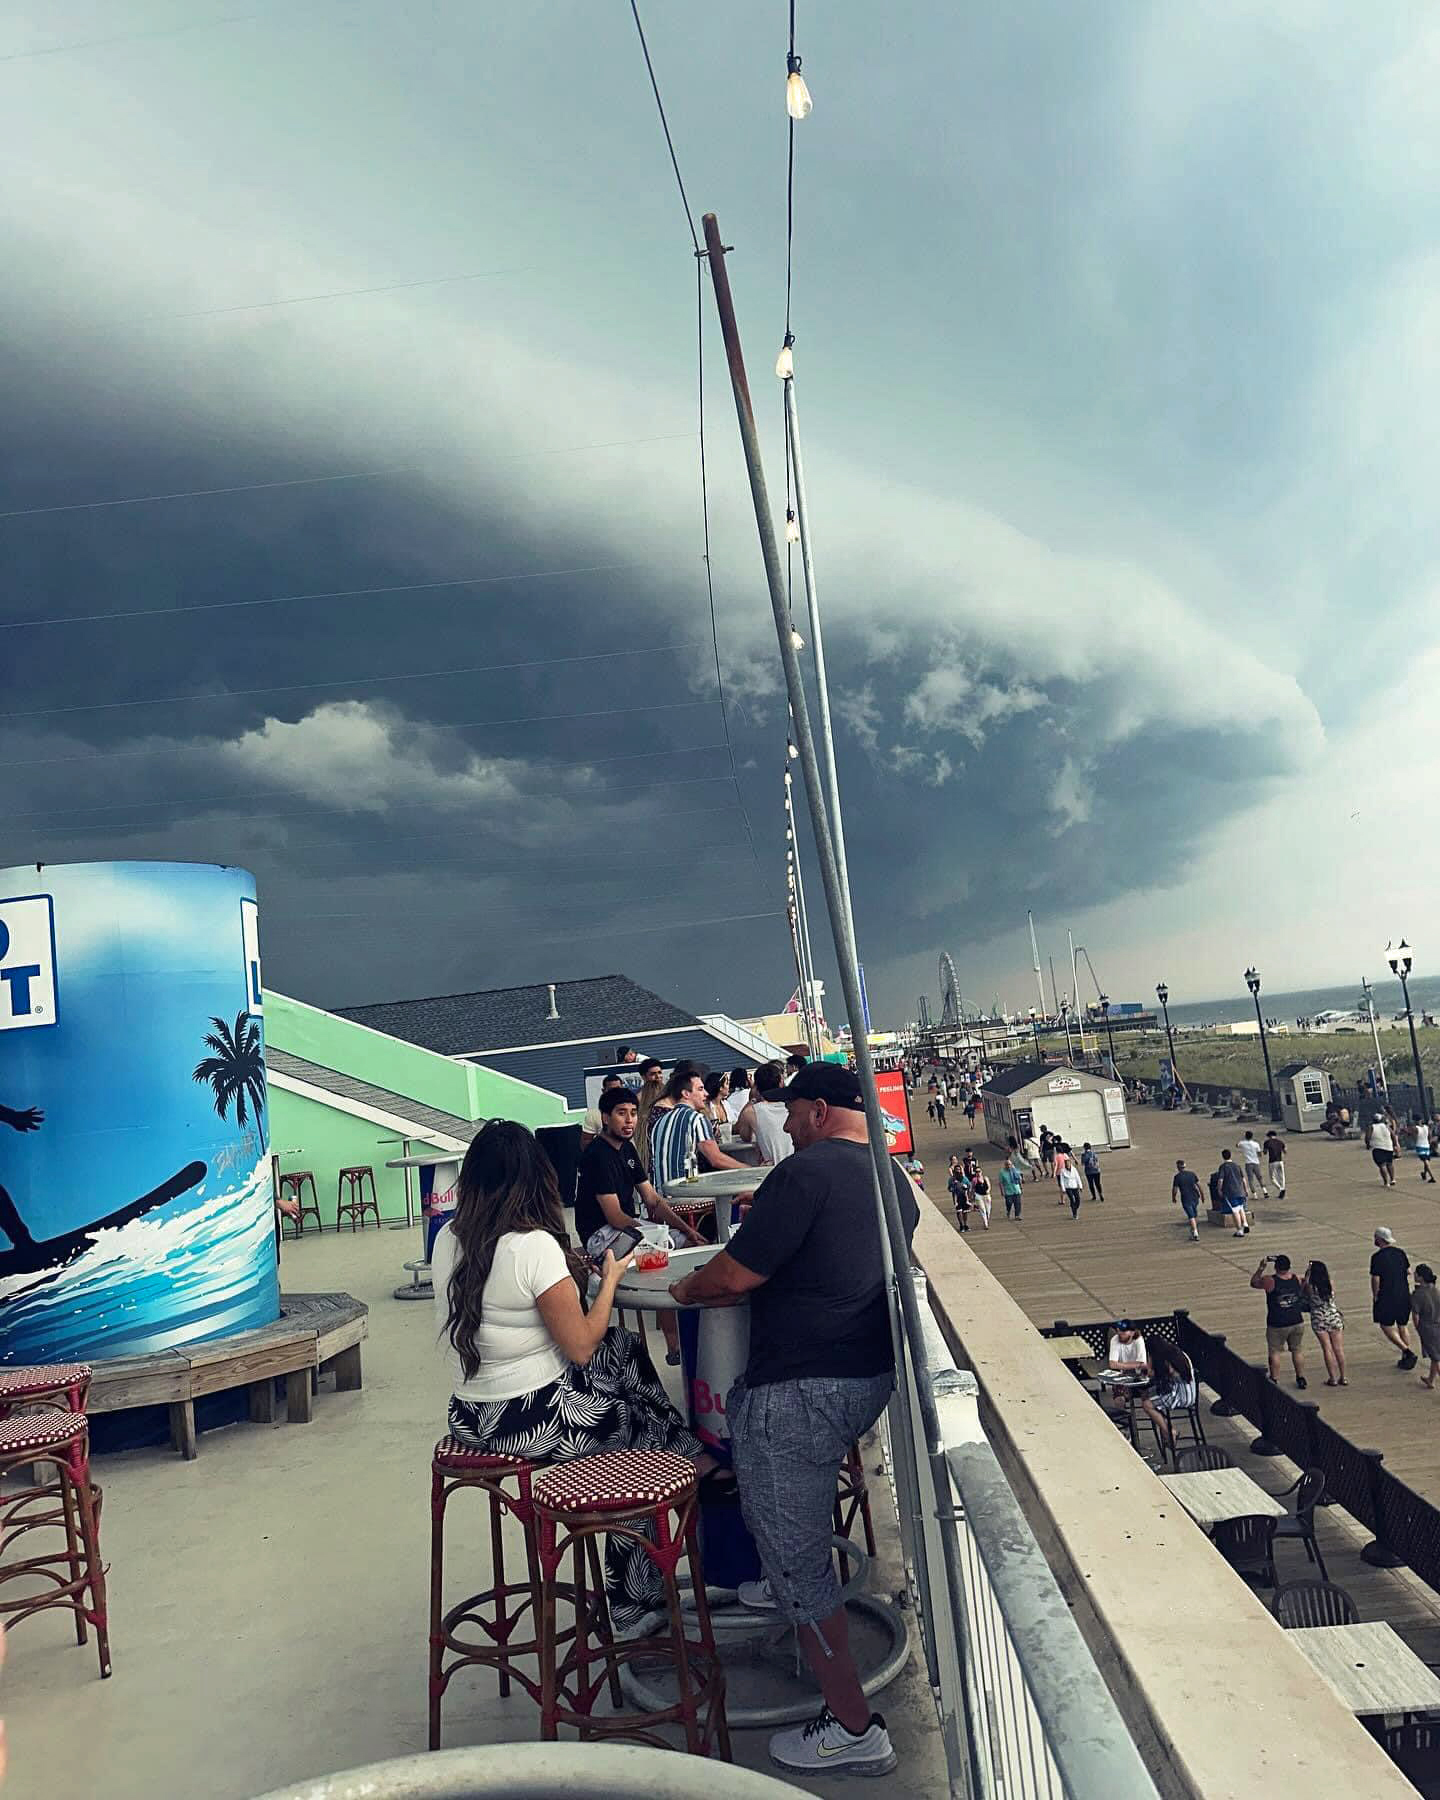 Shelf cloud along the Seaside Heights coast as storm approaches during early evening on June 23rd.